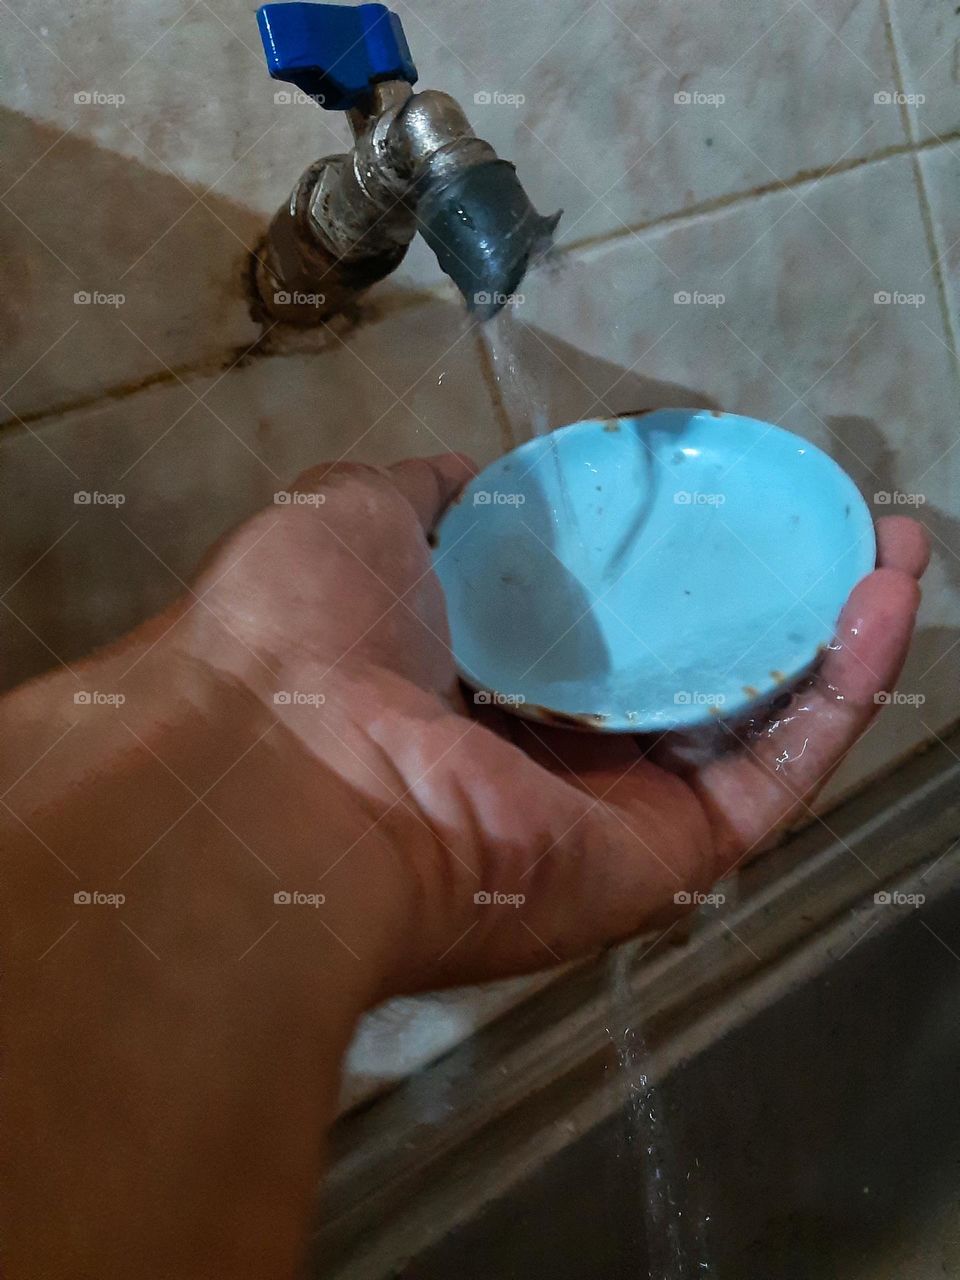 A colorful photo of a mini blue plate washed by a hand under a water tap